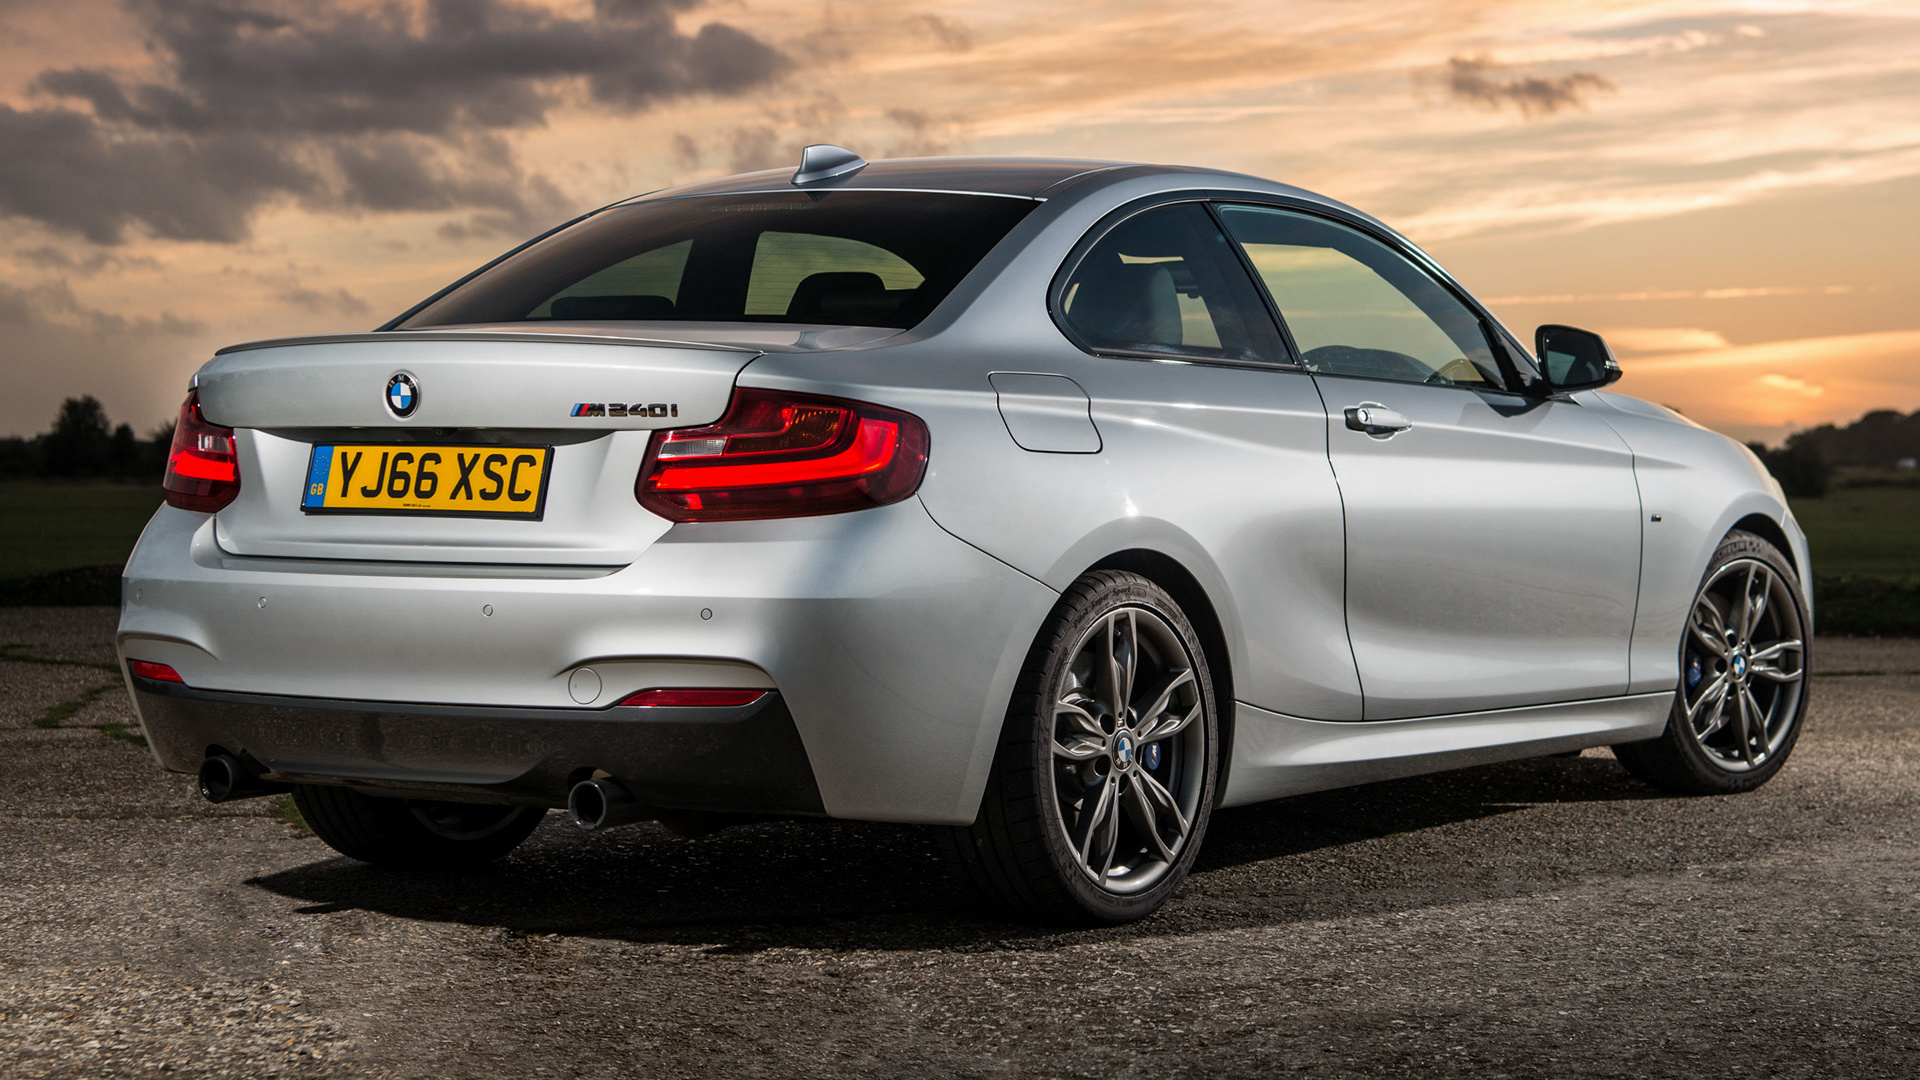 vehicles, bmw m2 coupe, compact car, silver car, sunset, bmw